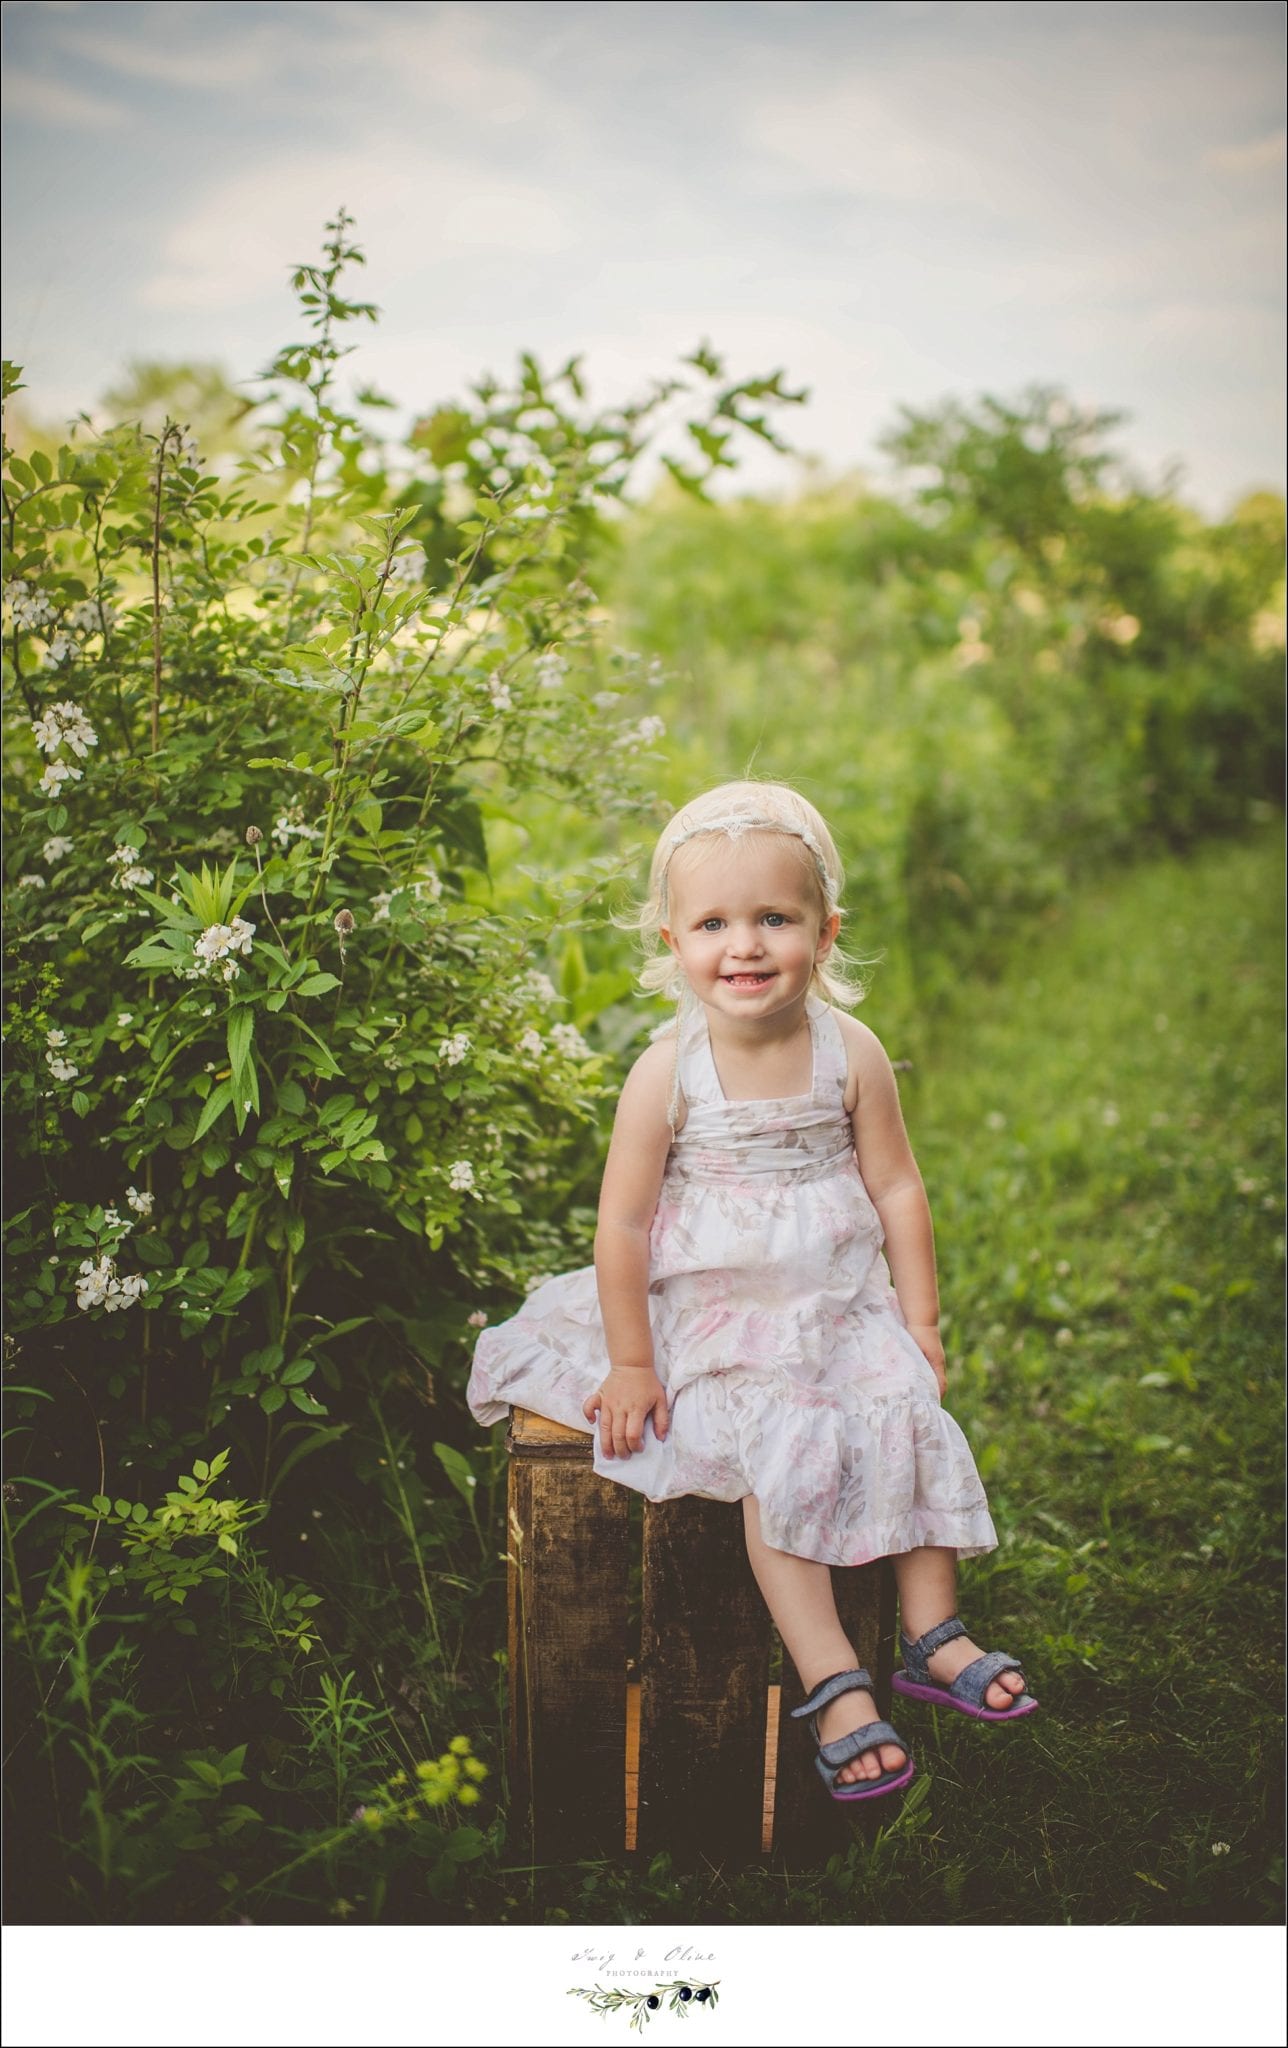 little sister, energetic, full of fun, happy, hair flowers, vintage, rustic, outdoorsy, greenery, white dress, twig and Olive photography